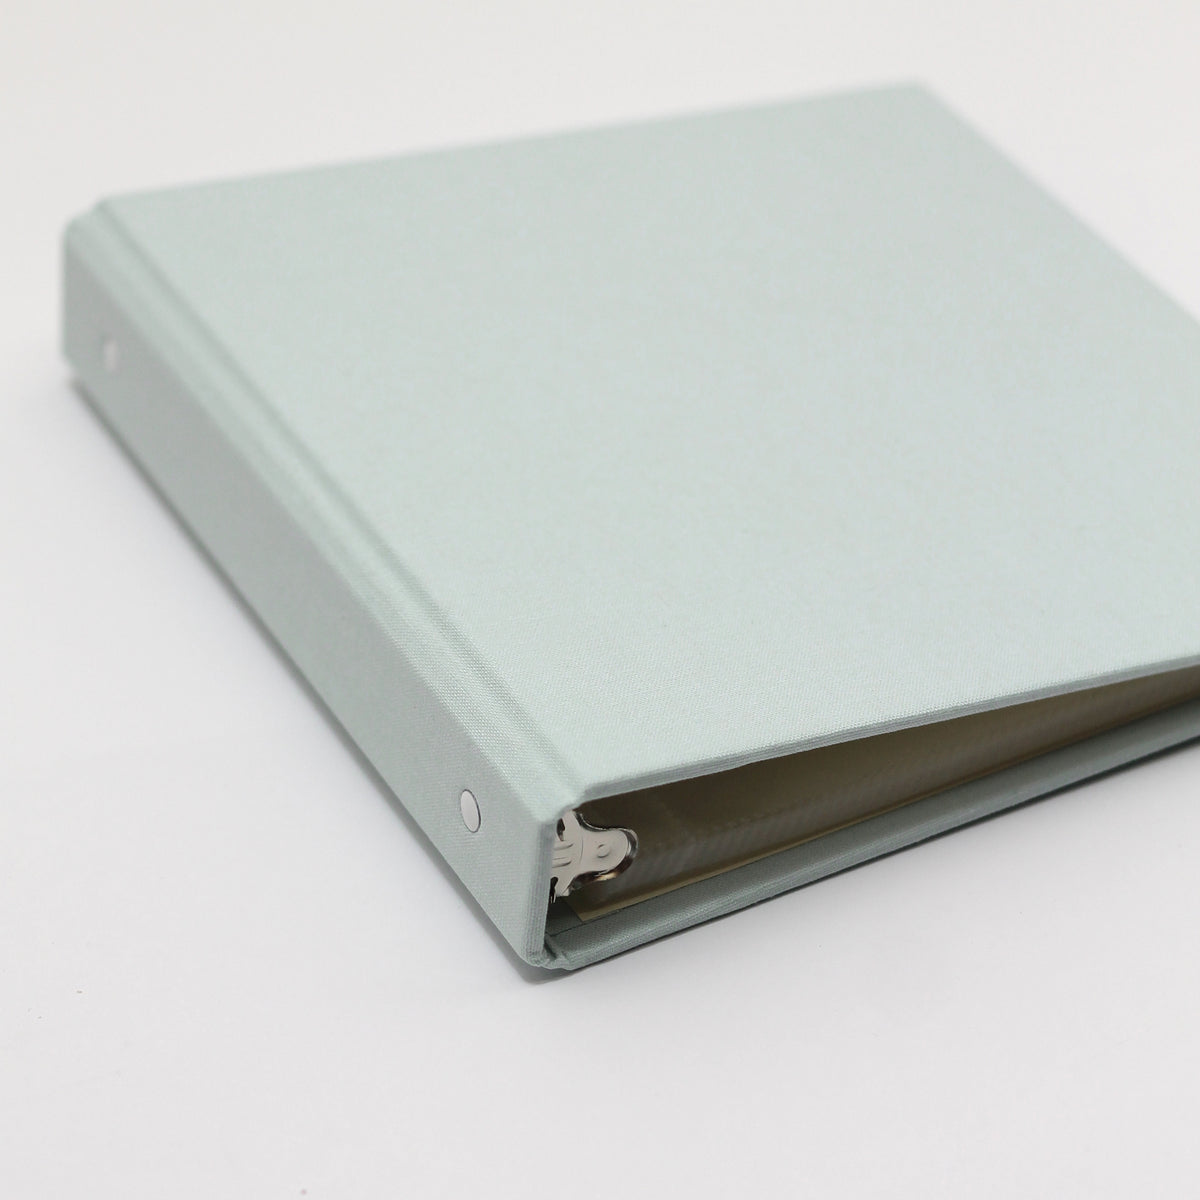 Medium Photo Binder | for 4 x 6 photos | with Powder Blue Cotton Cover